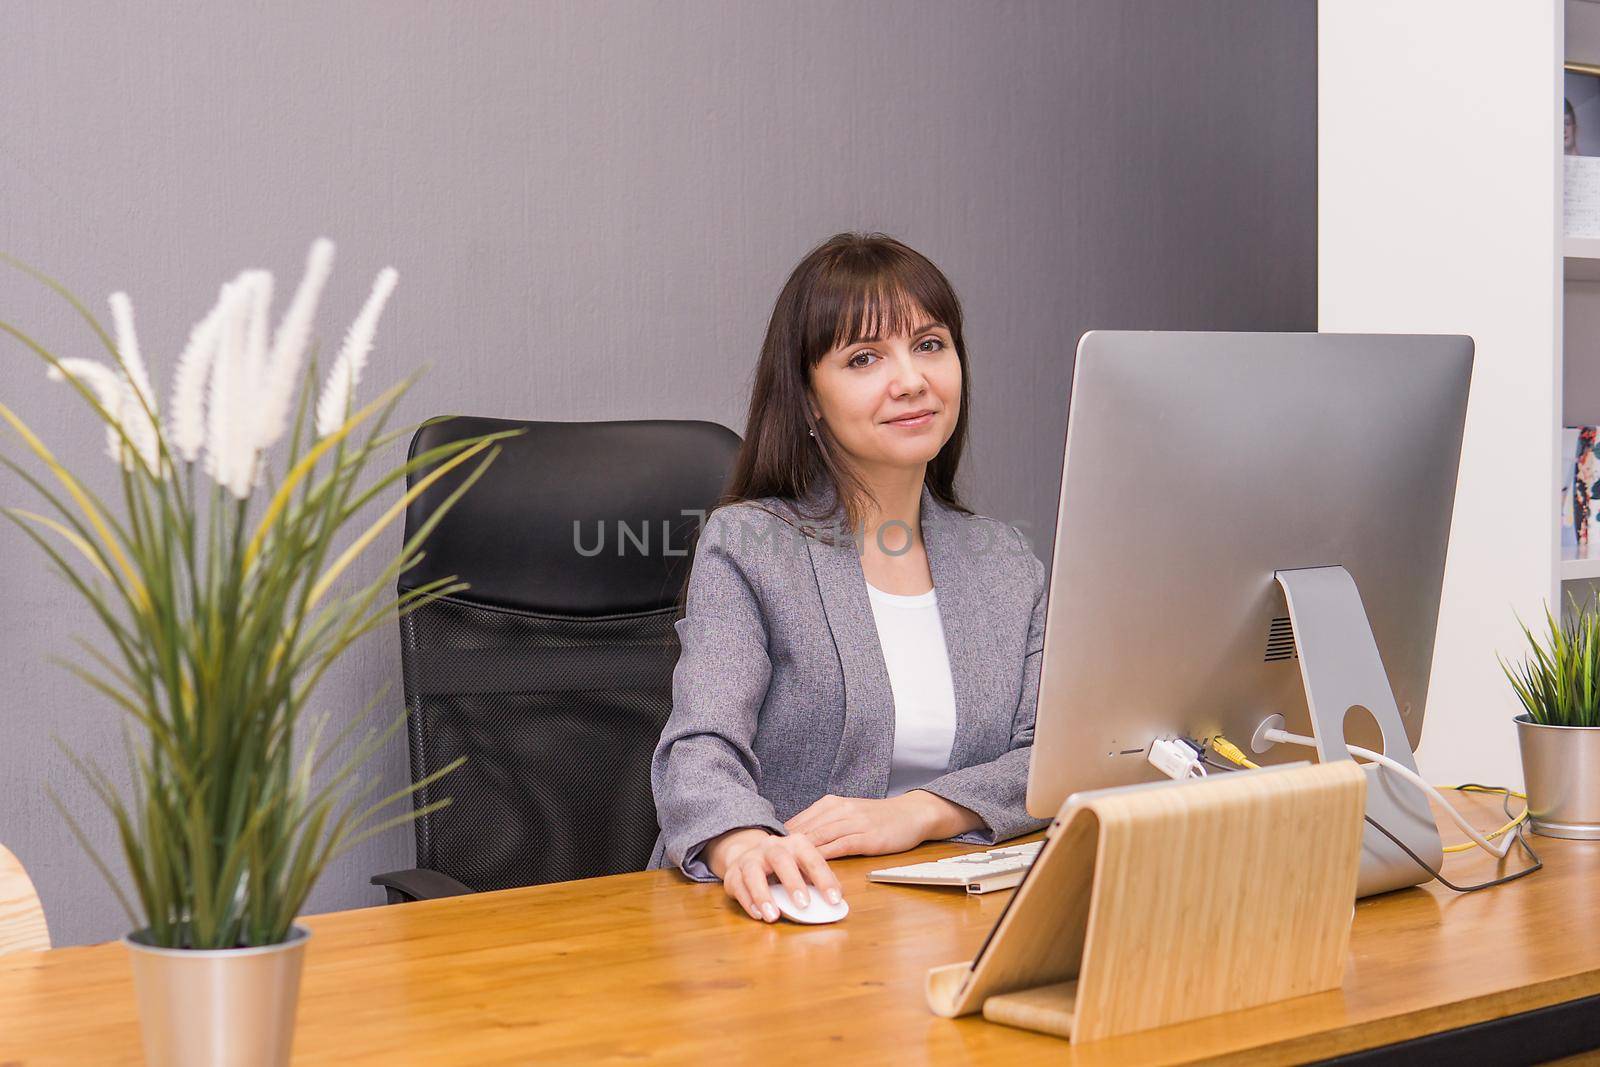 A brunette woman at a computer in the workplace. Business concept. by Annu1tochka